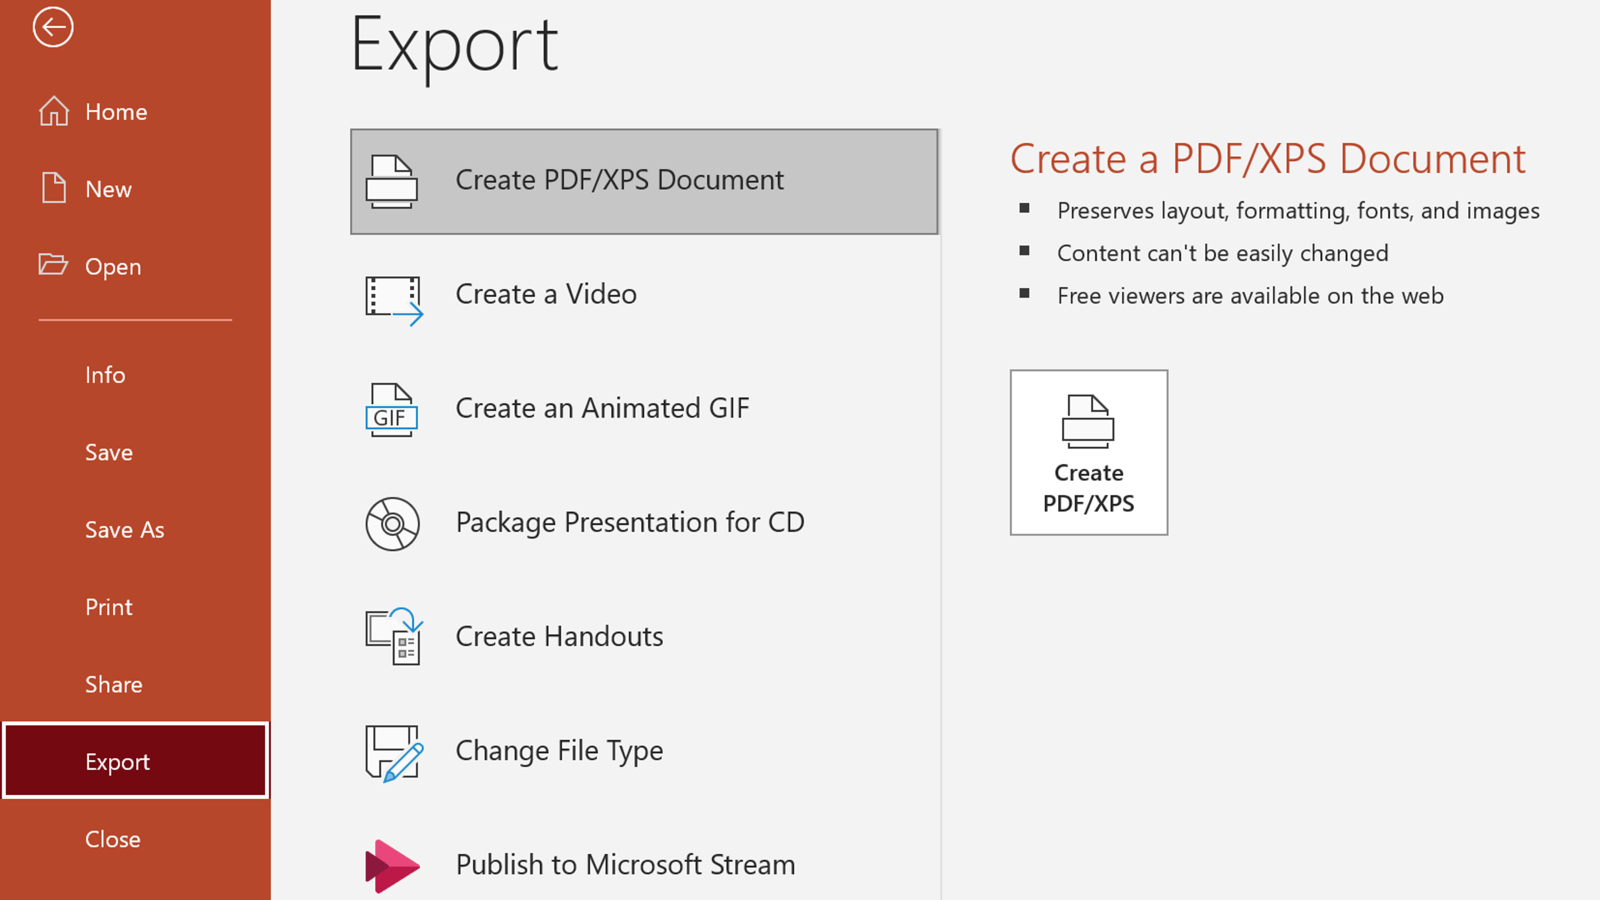 Screenshot of the PowerPoint Export tab. The first option is Create PDF/XPS Document